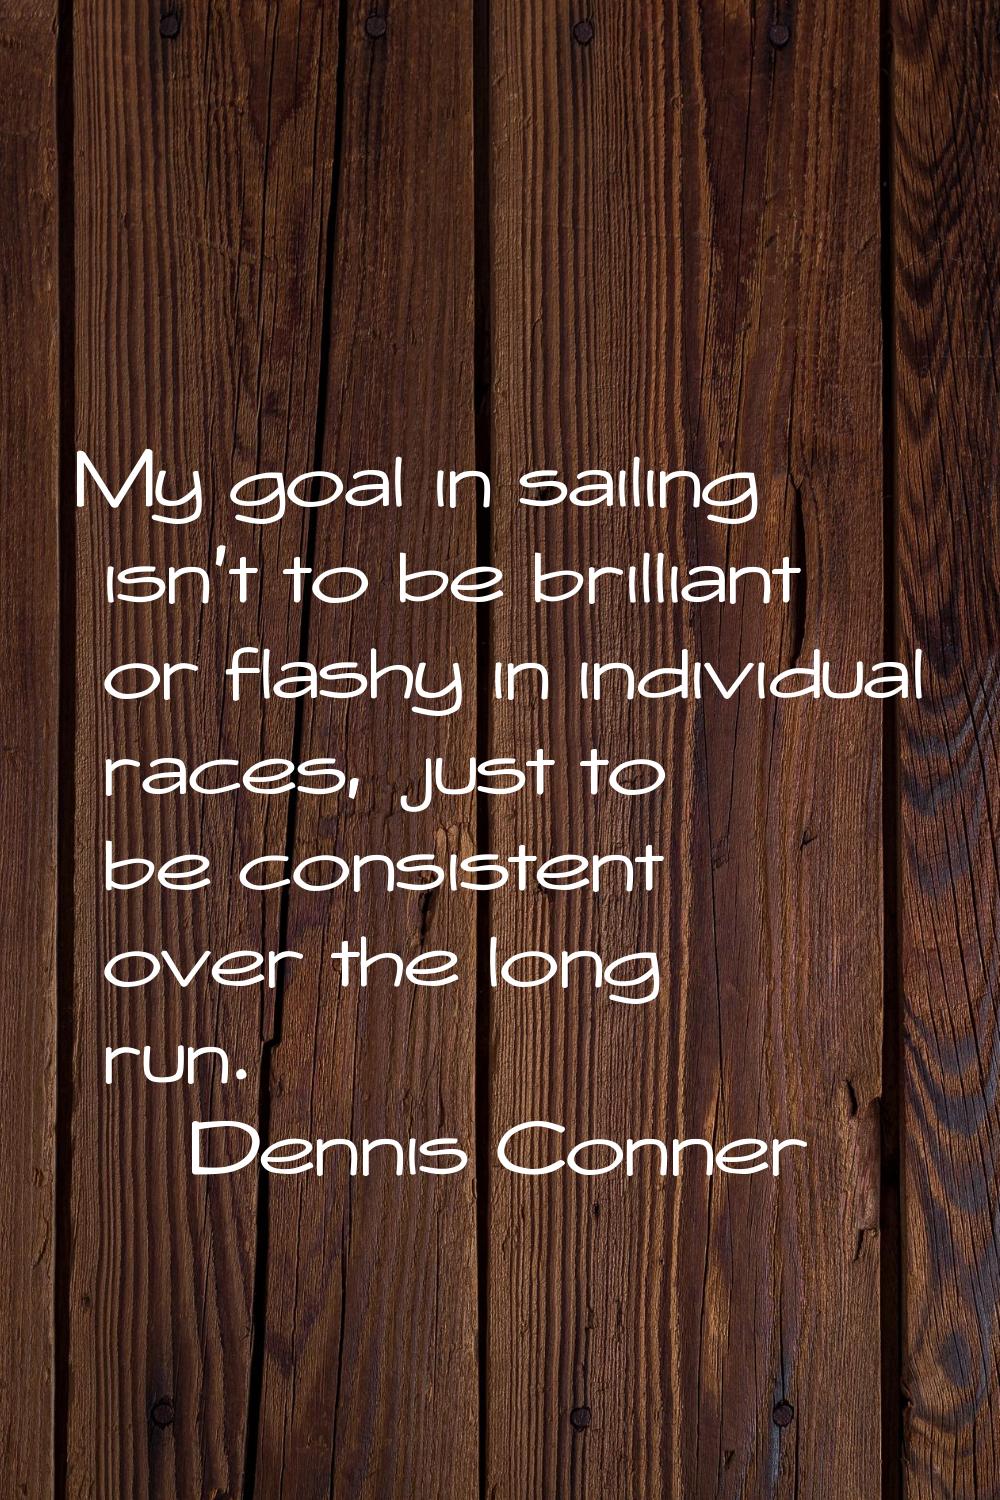 My goal in sailing isn't to be brilliant or flashy in individual races, just to be consistent over 